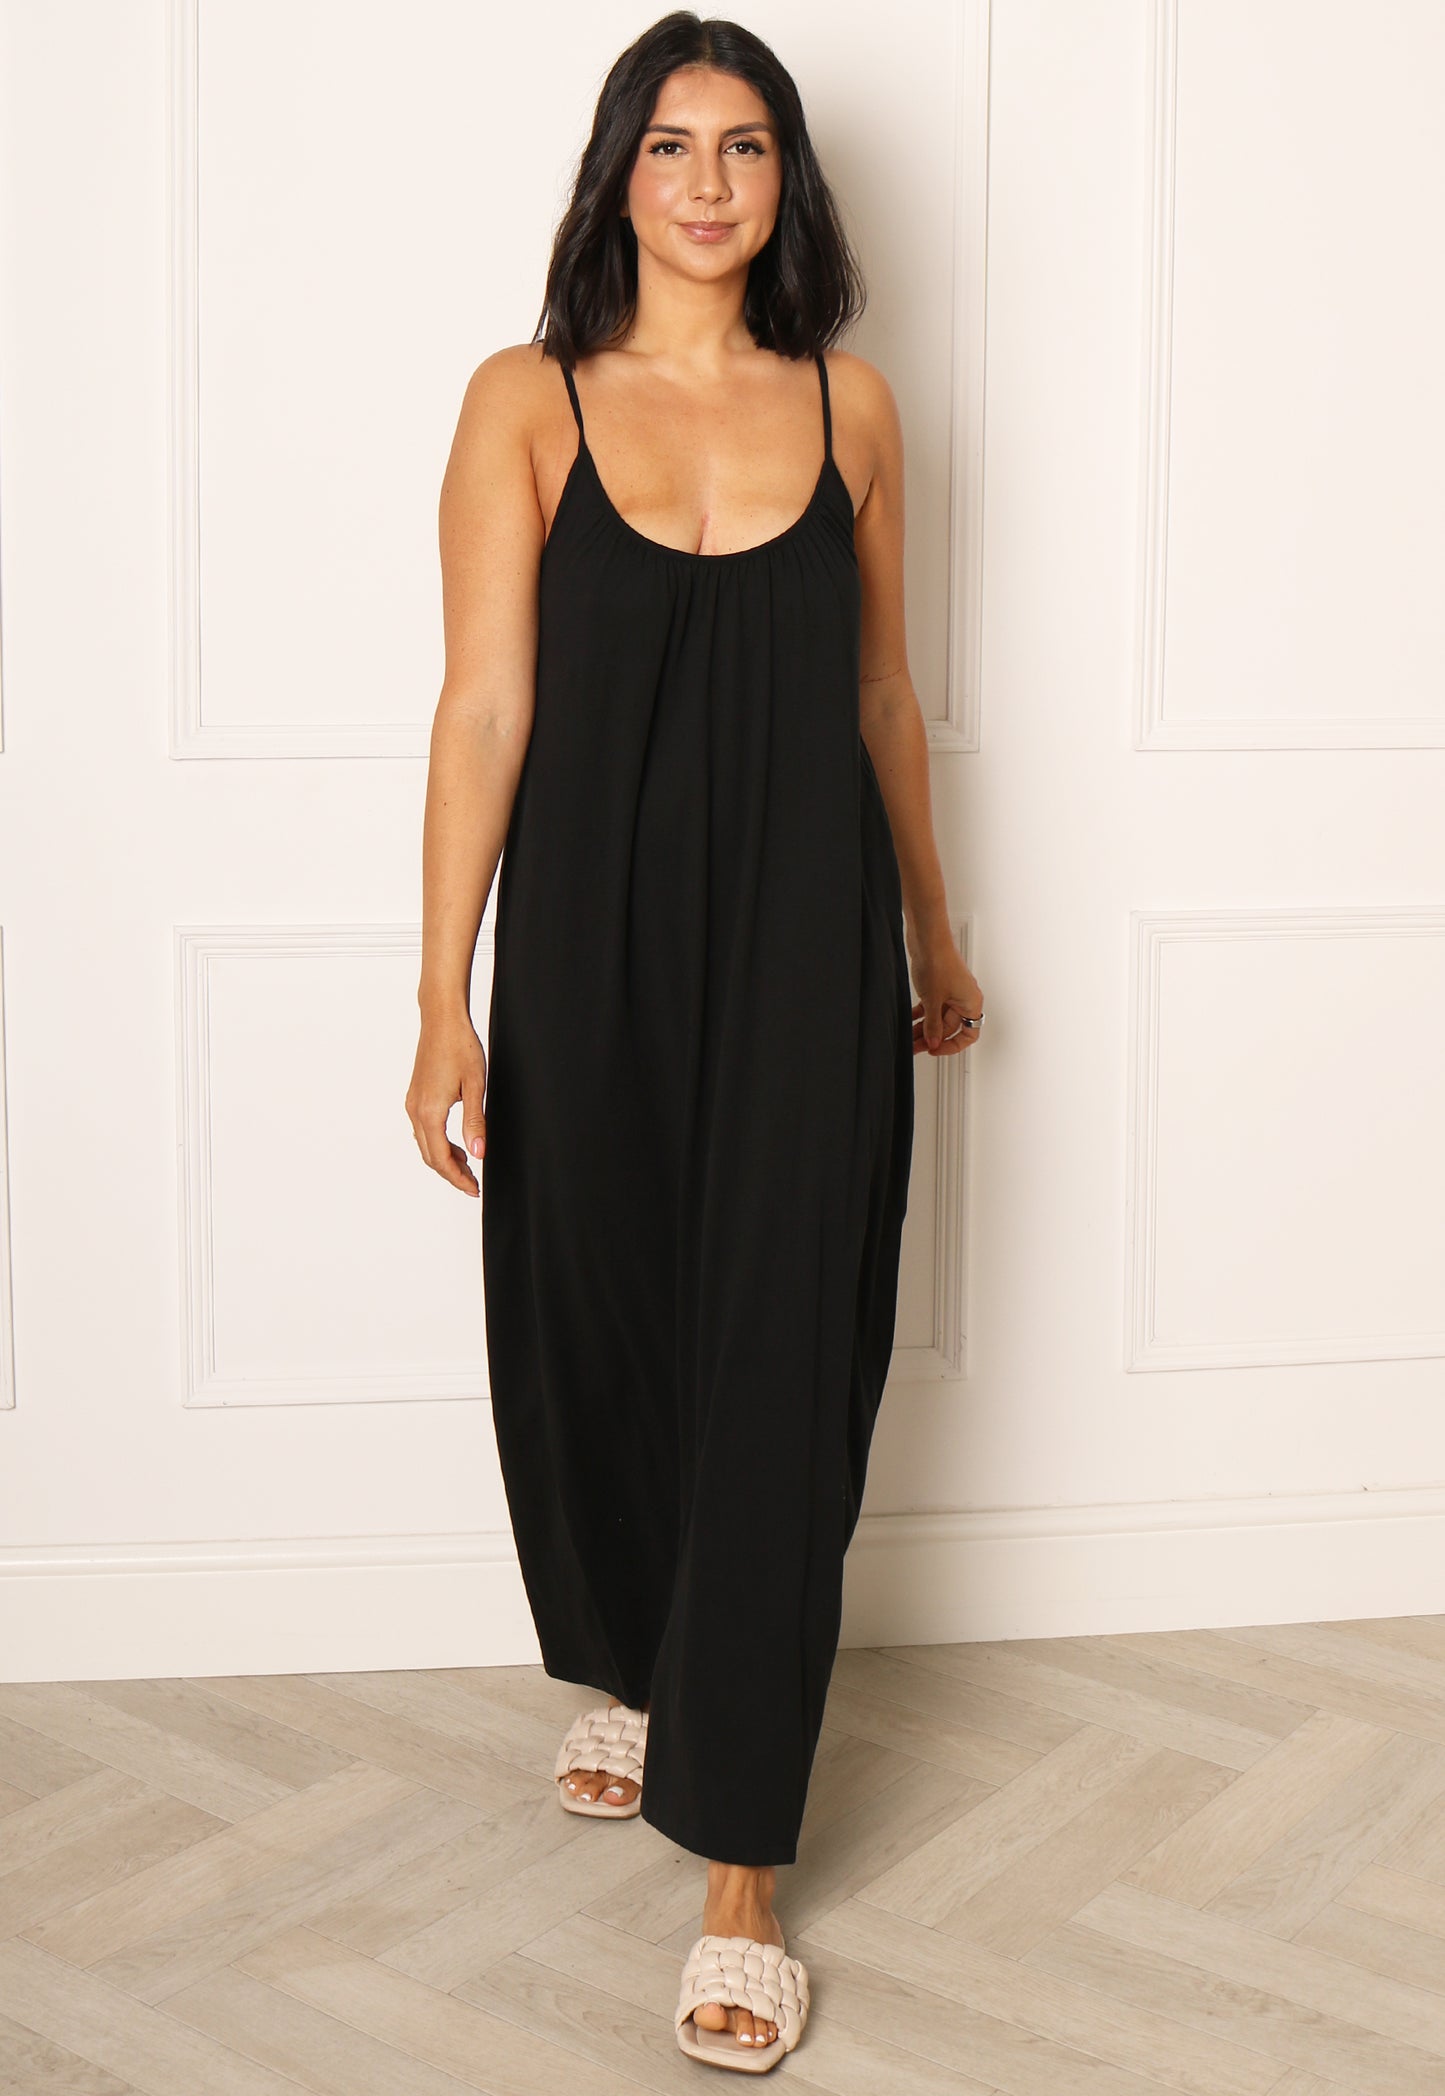 VERO MODA Luna Strappy Jersey Loose Fit Maxi Dress in Black - One Nation Clothing